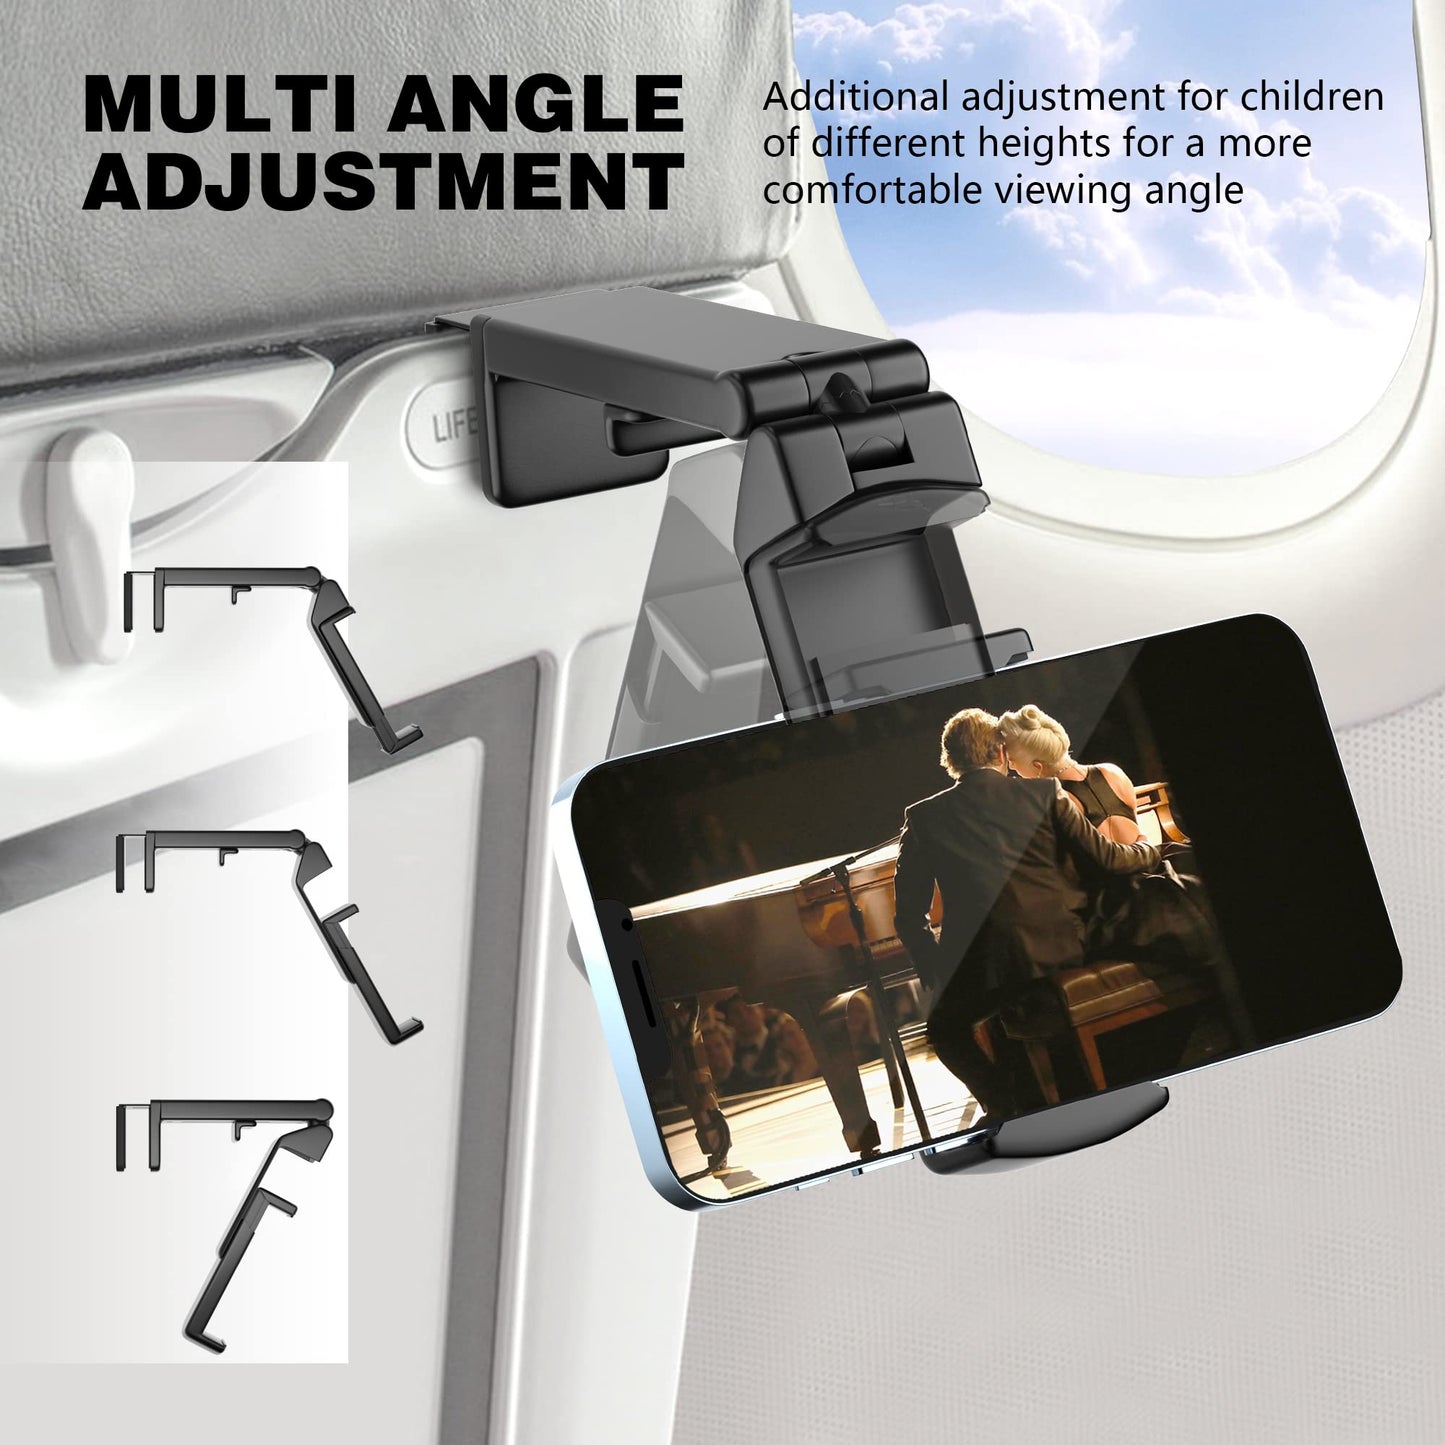 Universal Airplane in Flight Phone Mount. Handsfree Phone Holder for Desk with Multi-Directional Dual 360 Degree Rotation. Pocket Size Travel Essential Accessory for Flying. US Patented and Protected.